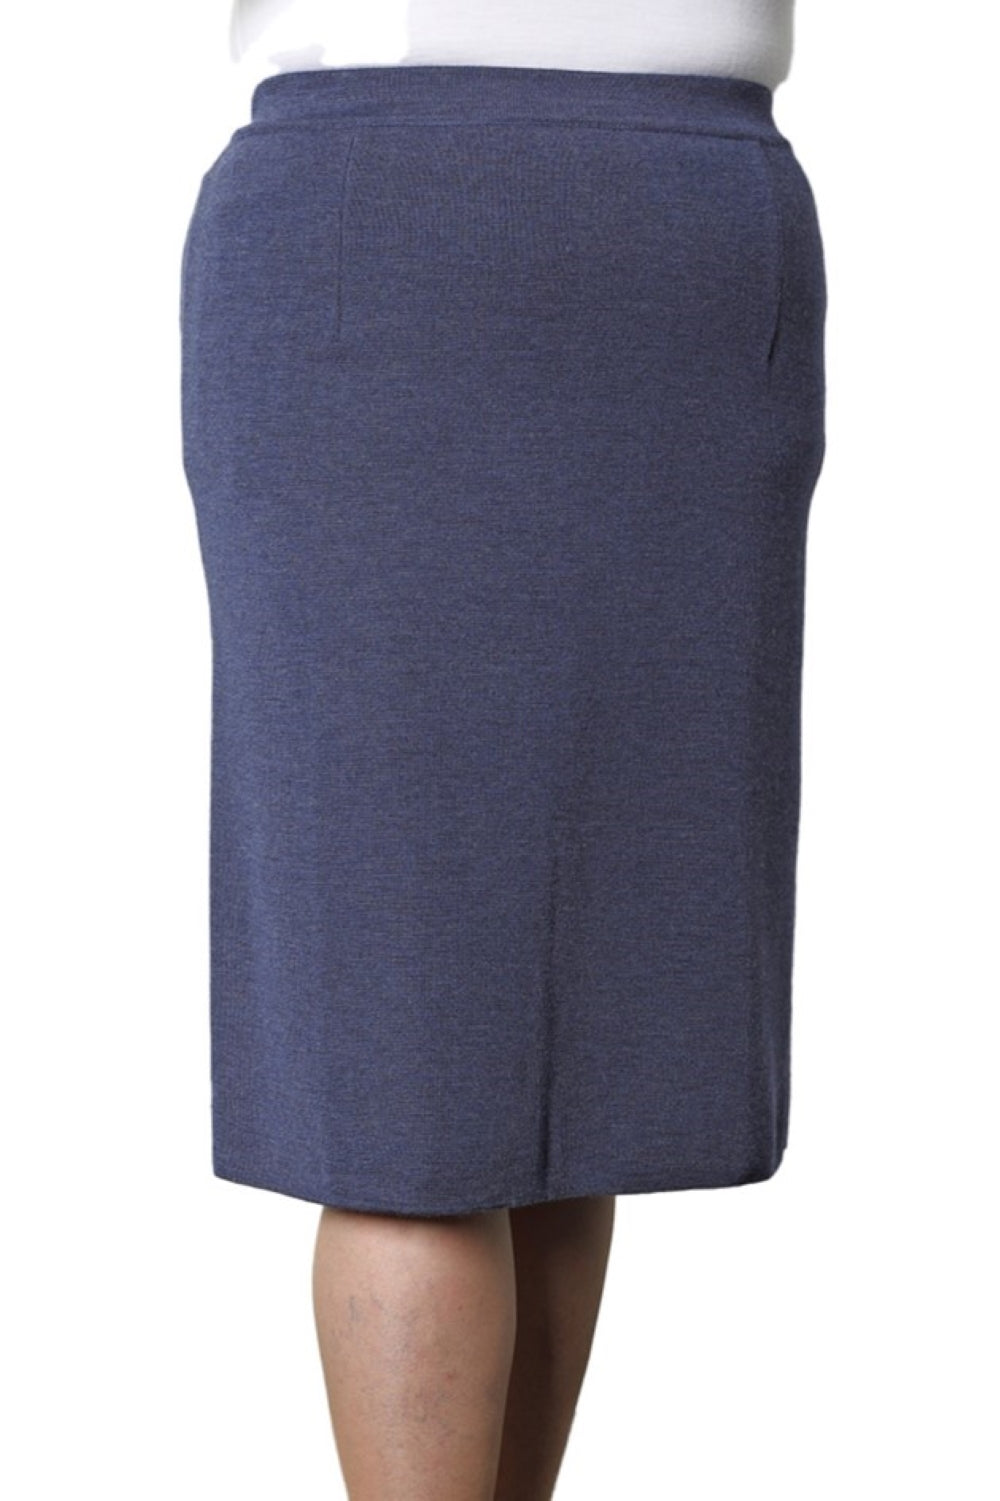 Products Made in Italy - Merino Plain Skirt Graglia